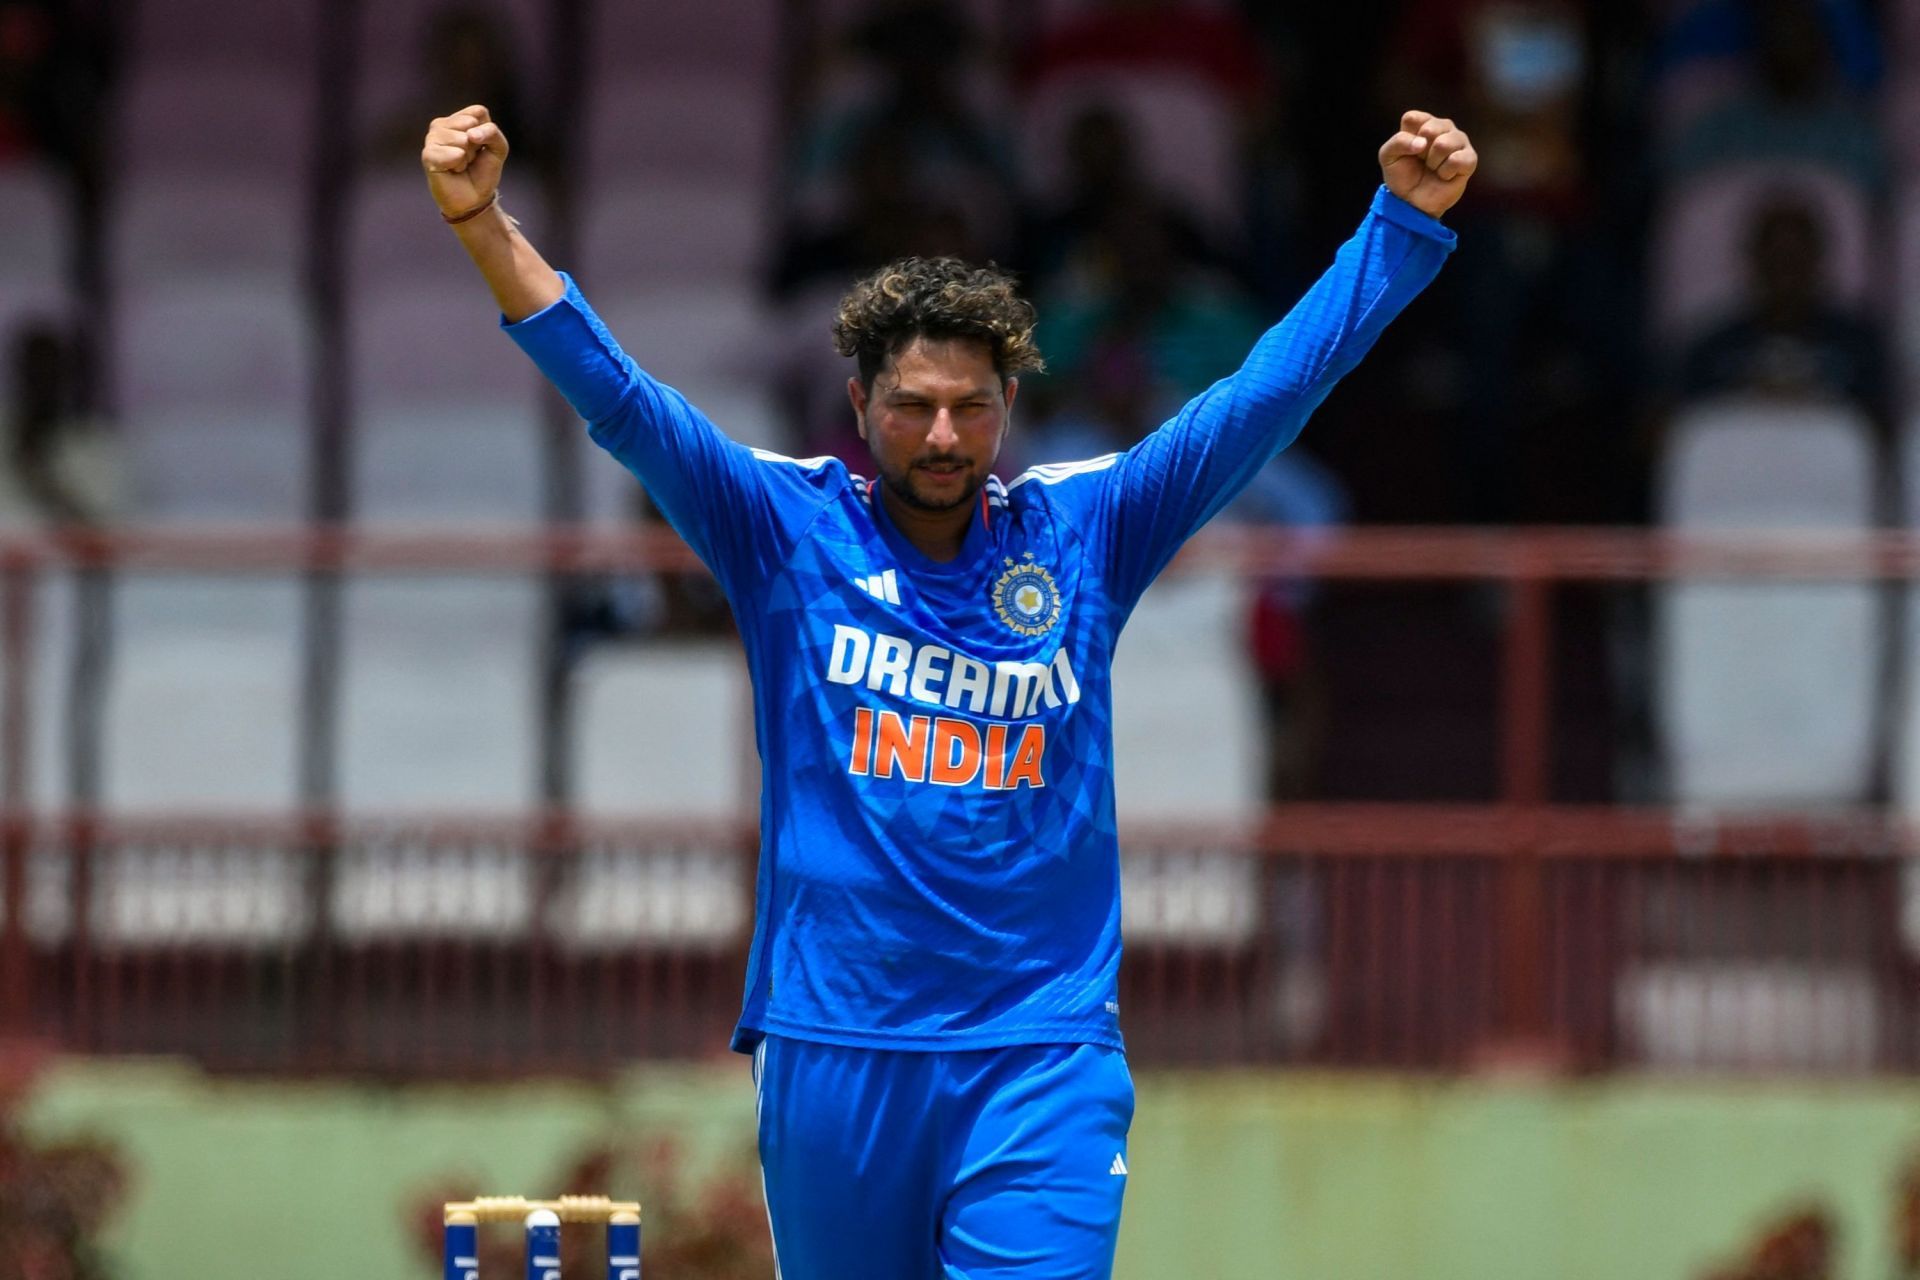 Kuldeep Yadav was the pick of the Indian bowlers once again